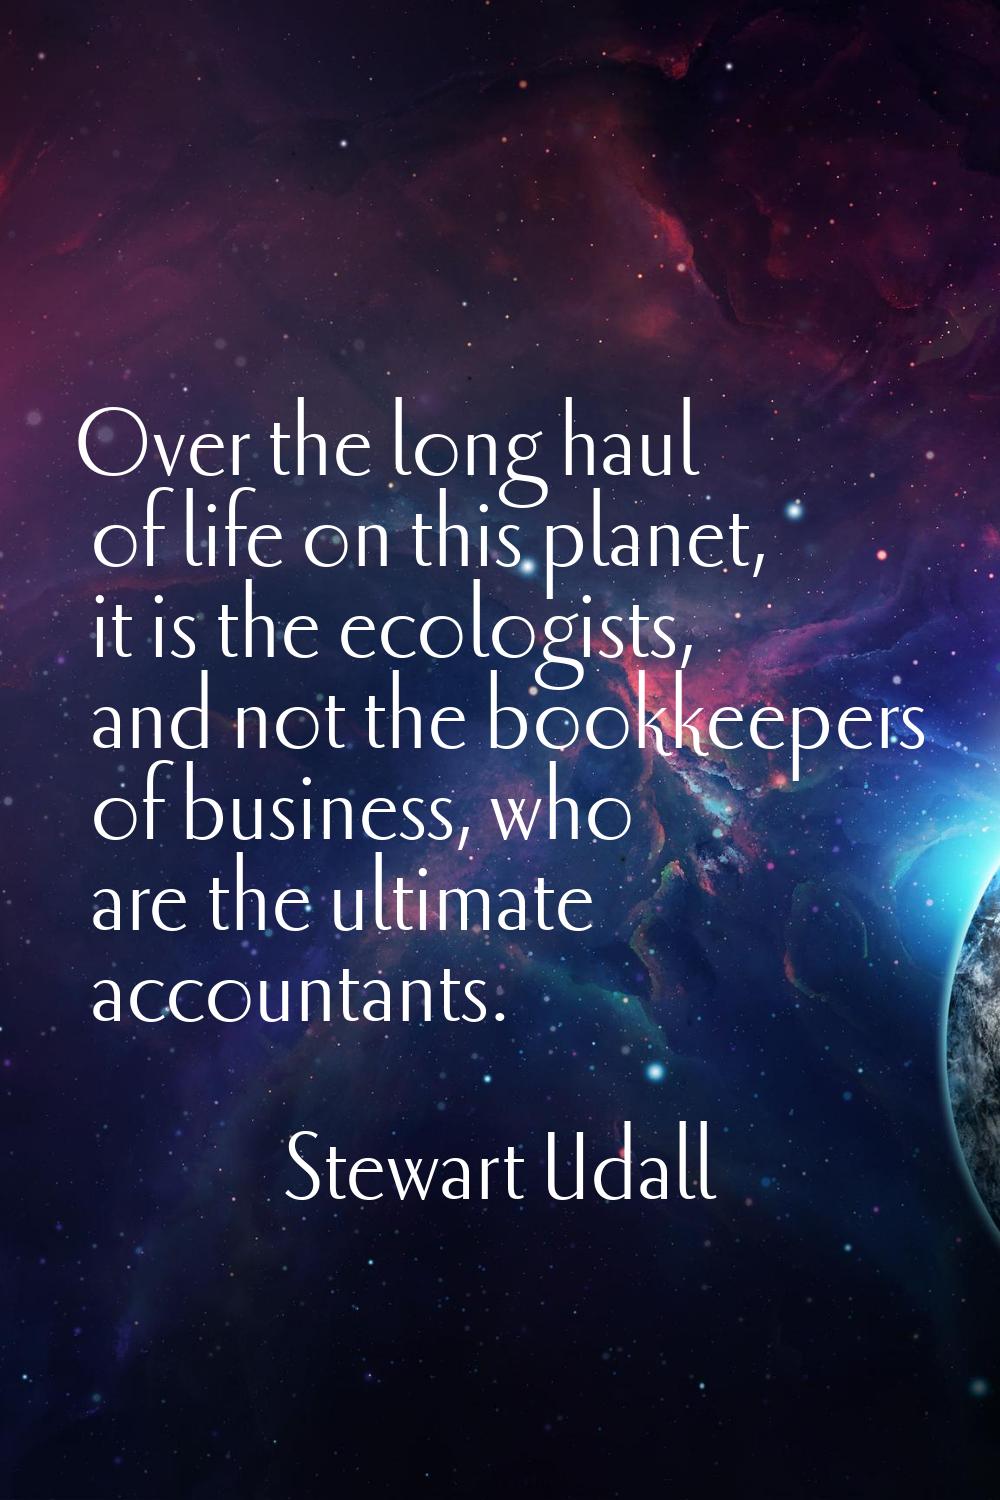 Over the long haul of life on this planet, it is the ecologists, and not the bookkeepers of busines